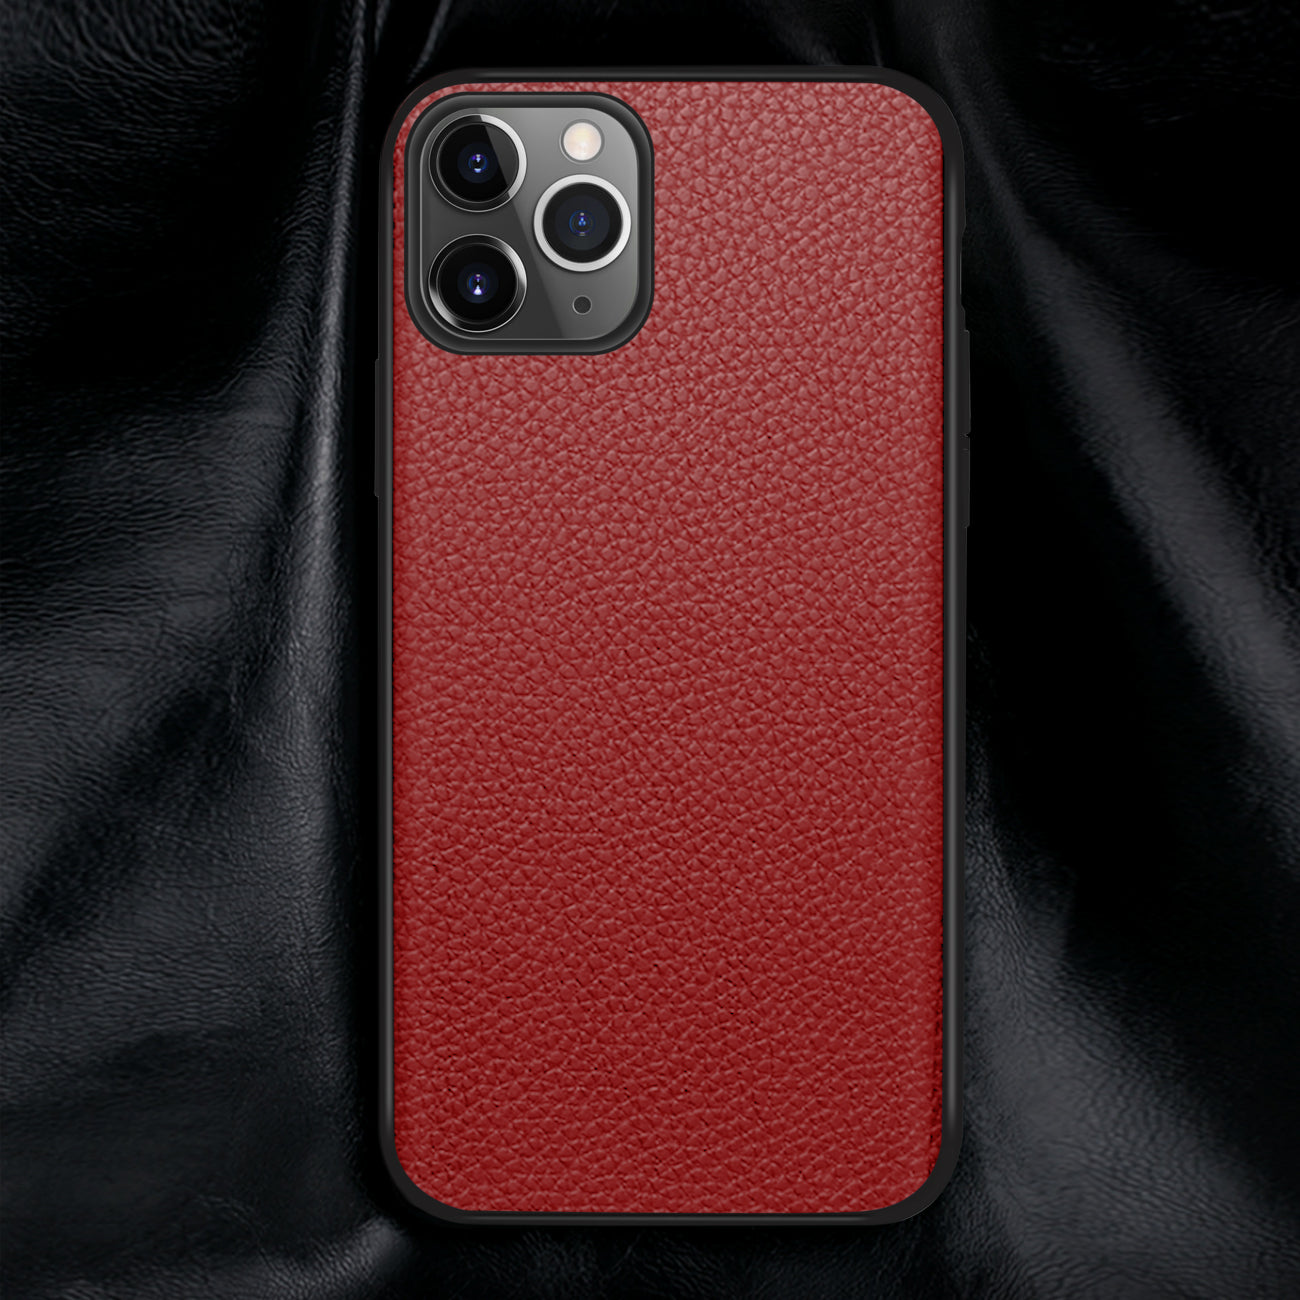 Reiko Premium PU Leather Outside and Flexible TPU Silicone Hybrid Slim Case for IPhone 11 PRO